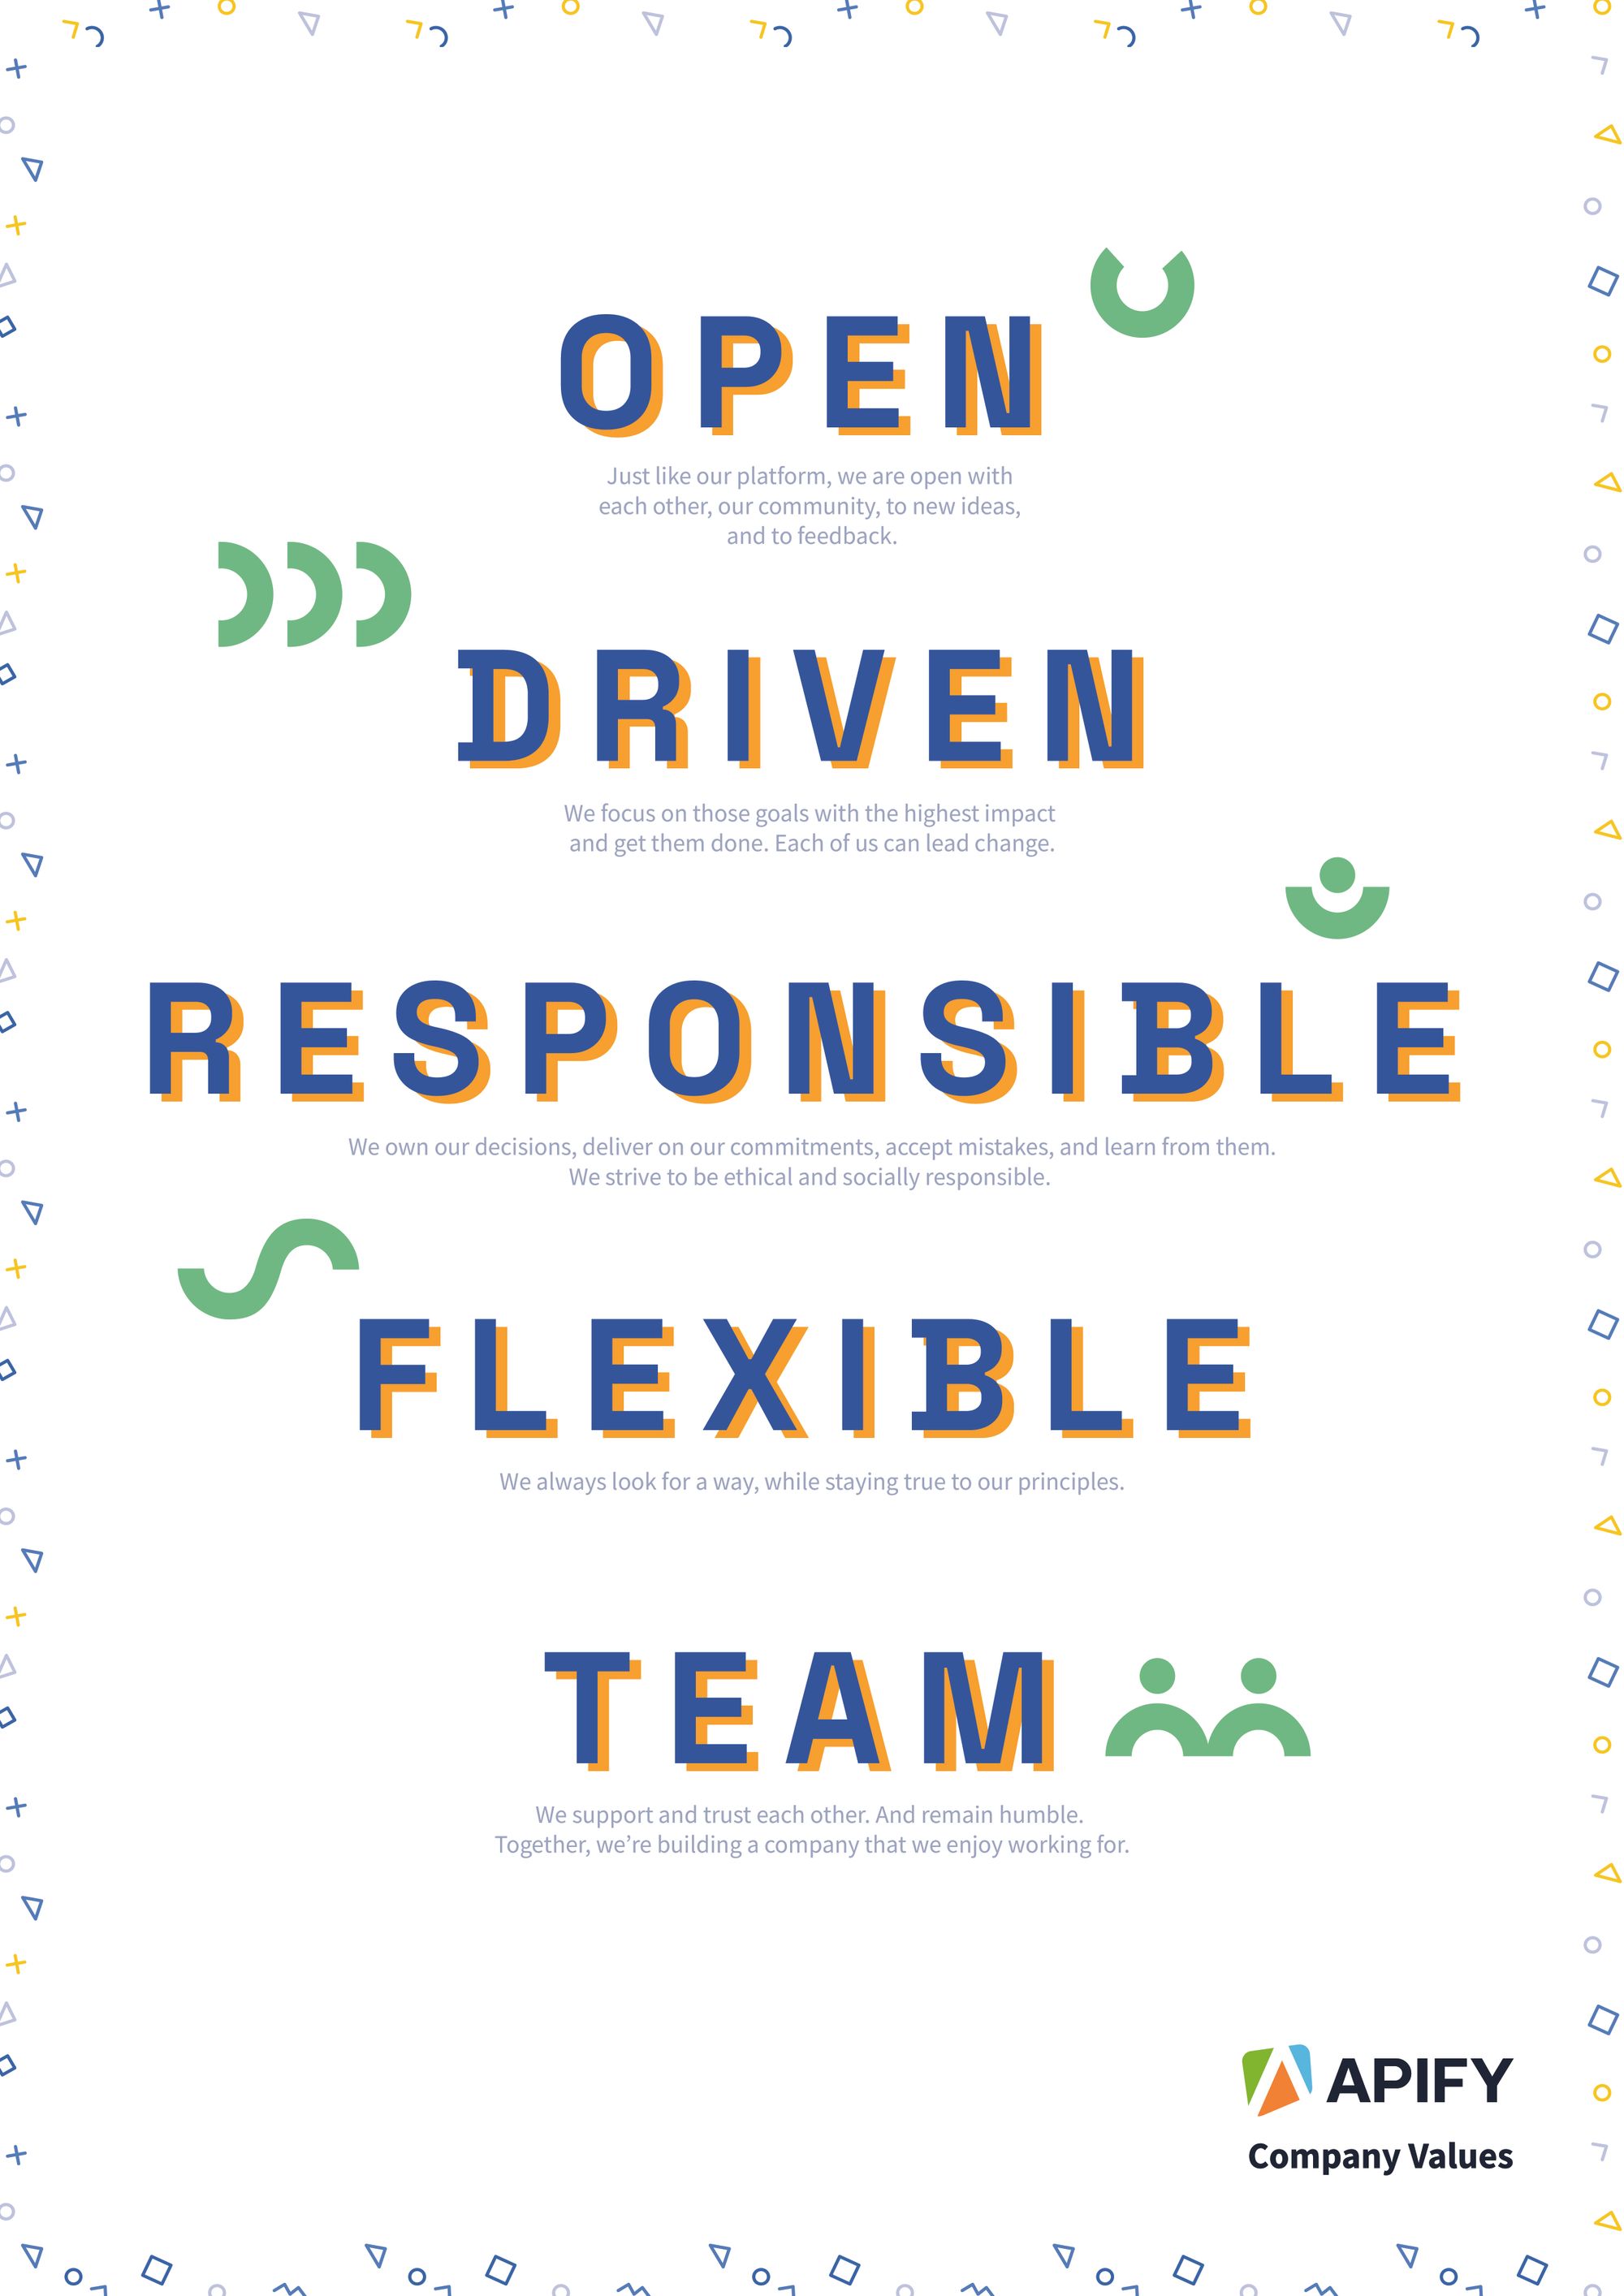 illustrated Apify values: open, driven, responsible, flexible, team